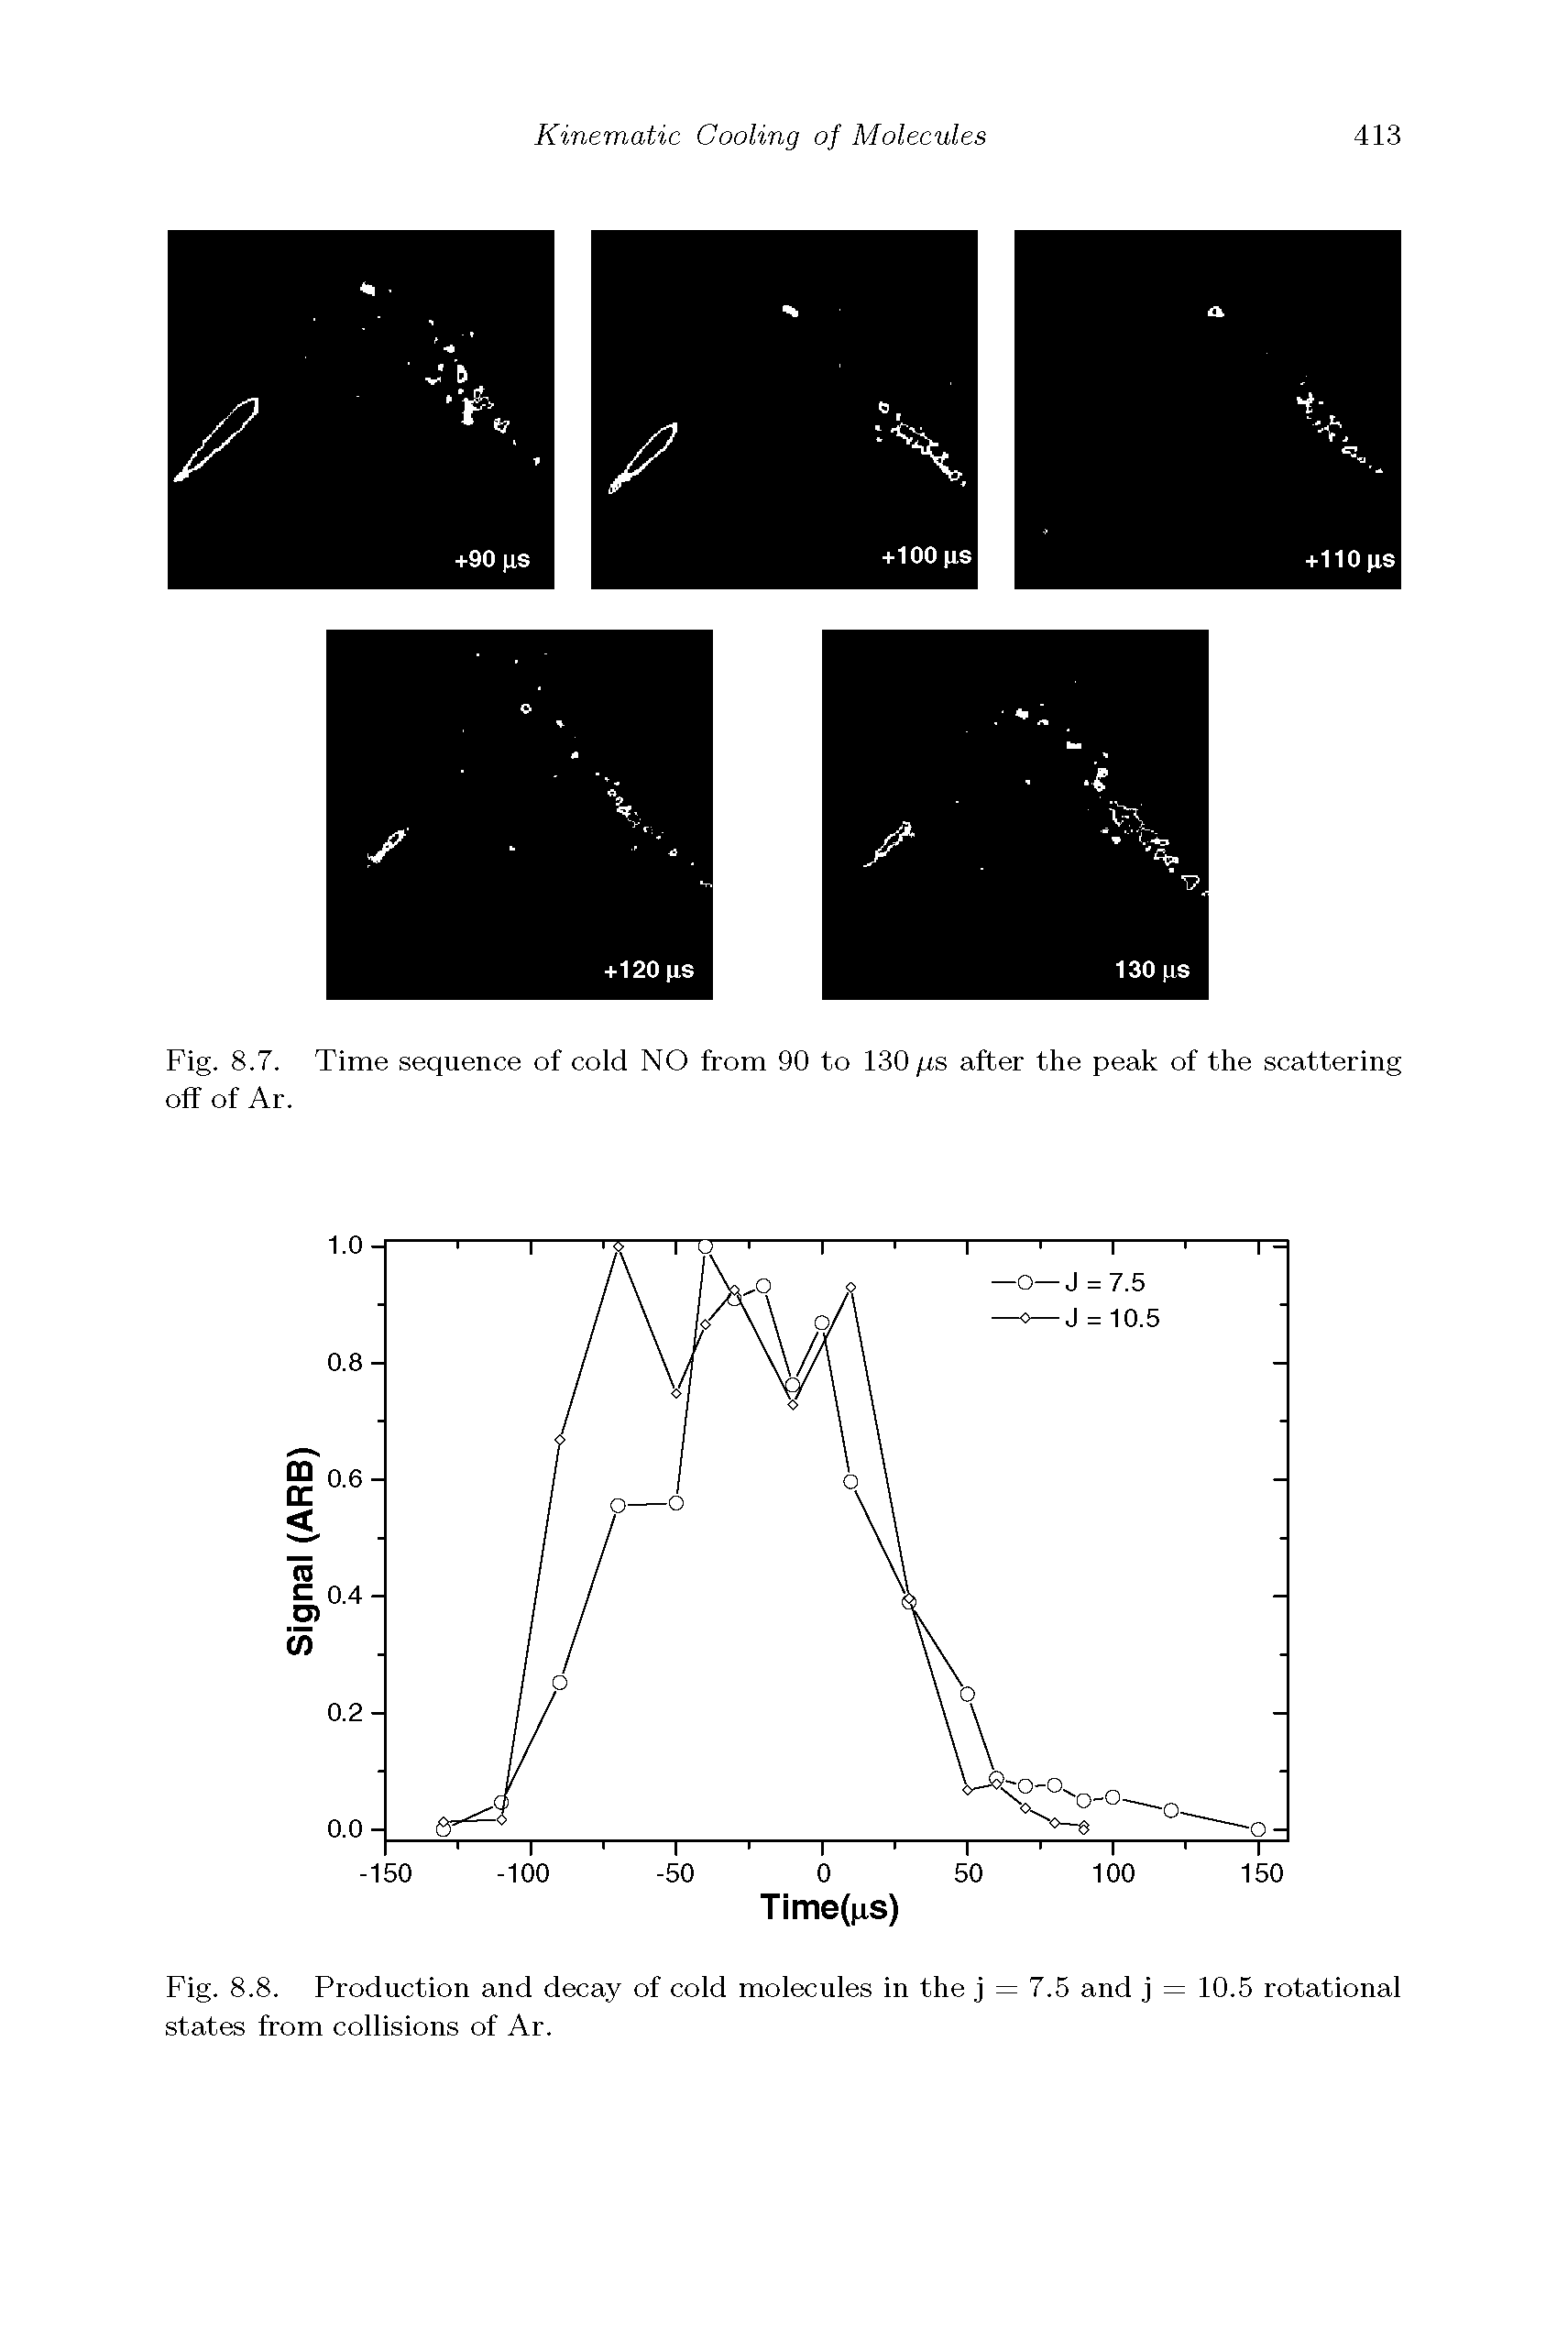 Fig. 8.7. Time sequence of cold NO from 90 to 130/is after the peak of the scattering off of Ar.